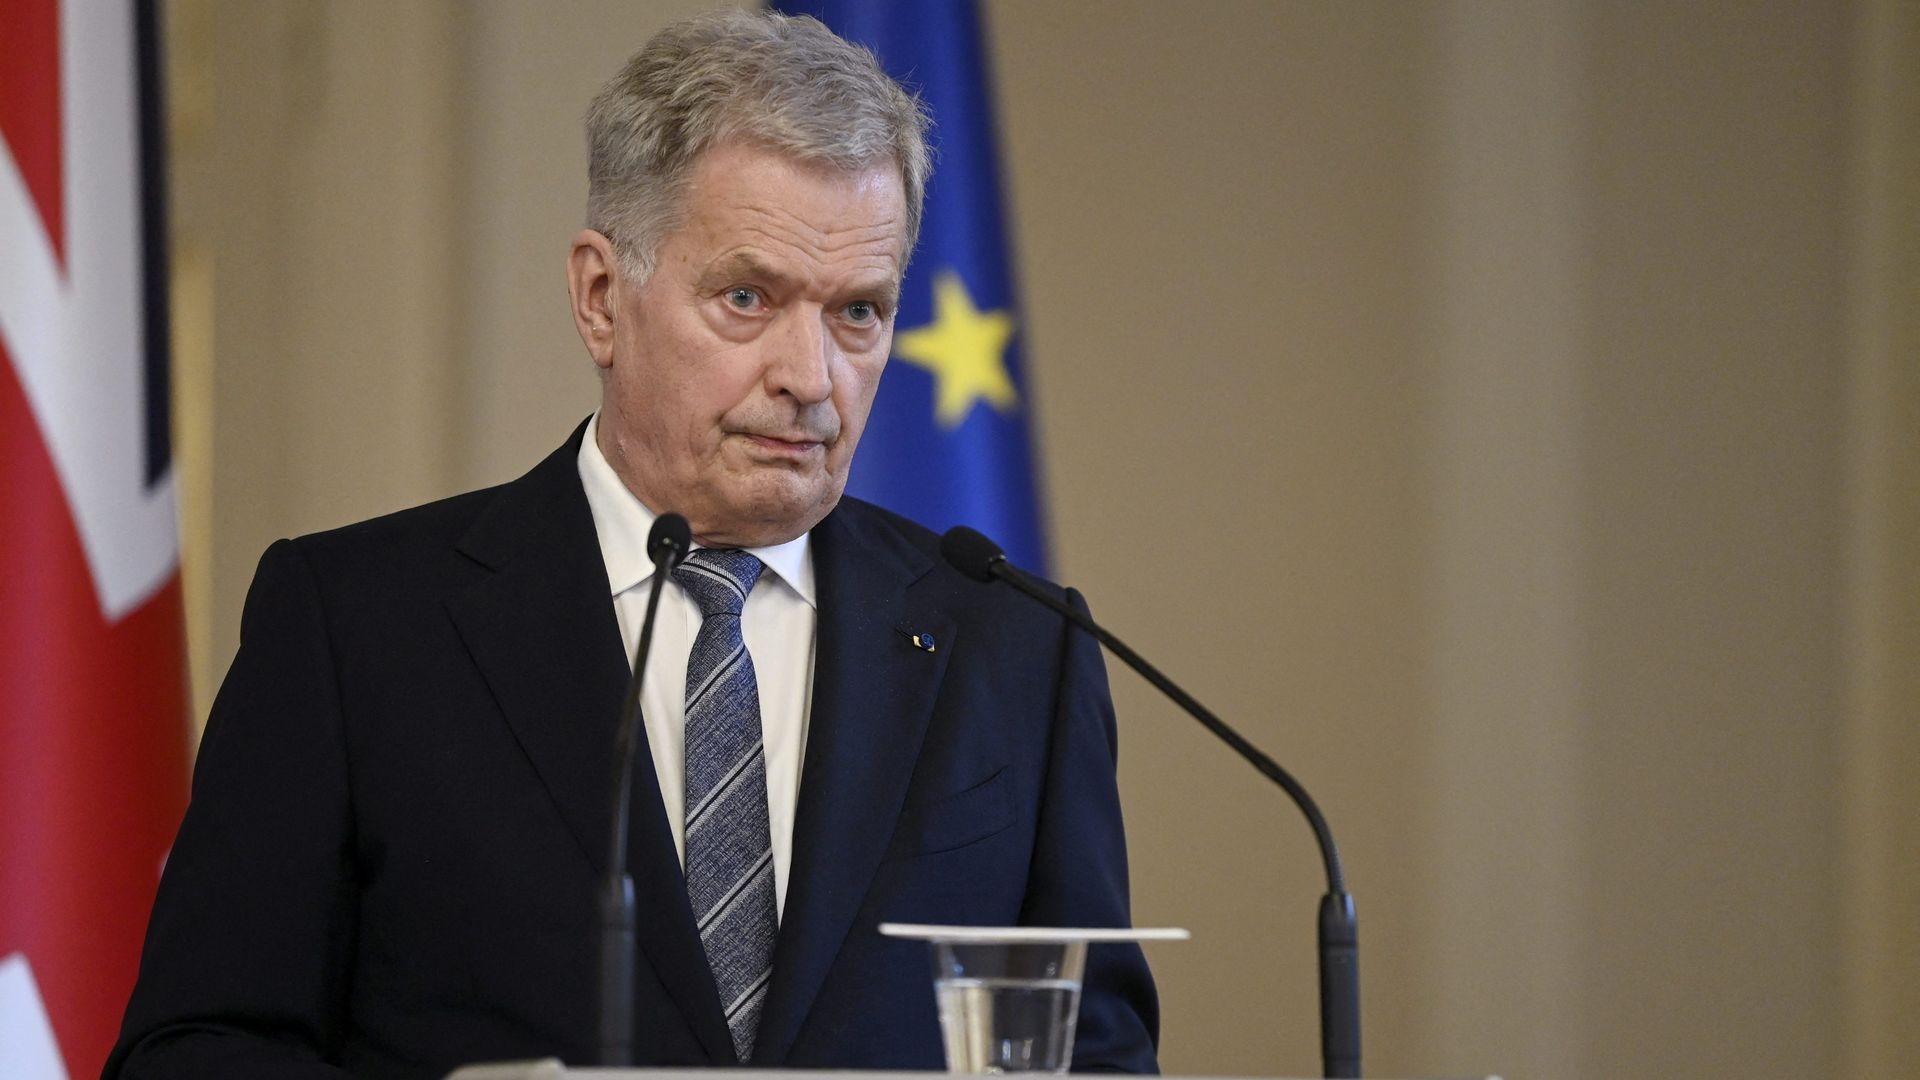 Finnish President Sauli Niinisto during a press conference in Helsinki on May 11.